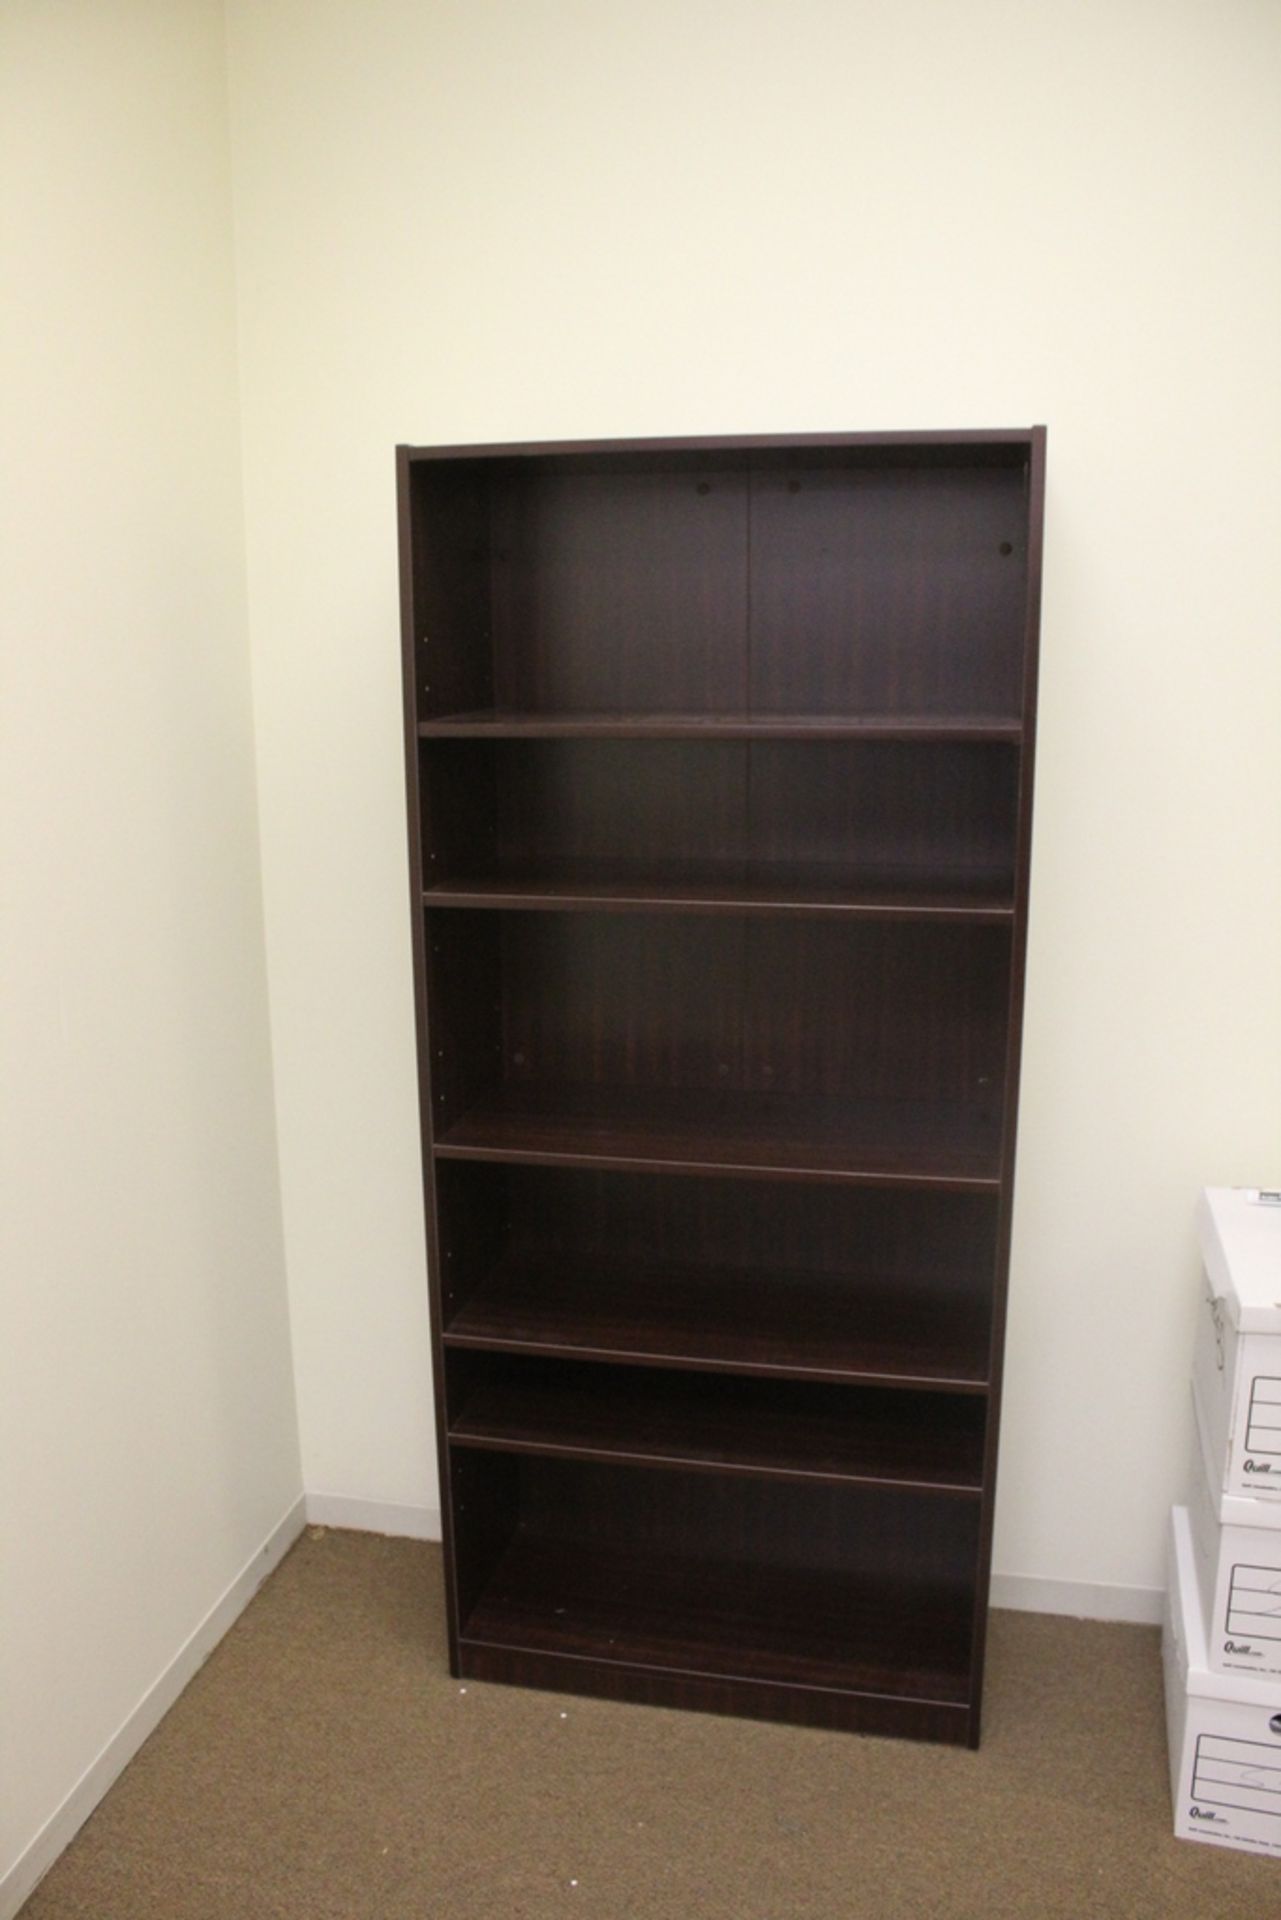 HON U-SHAPED OFFICE DESK, 106" X 72" AND BOOKCASE, 71" X 32" X 14" - Image 3 of 3